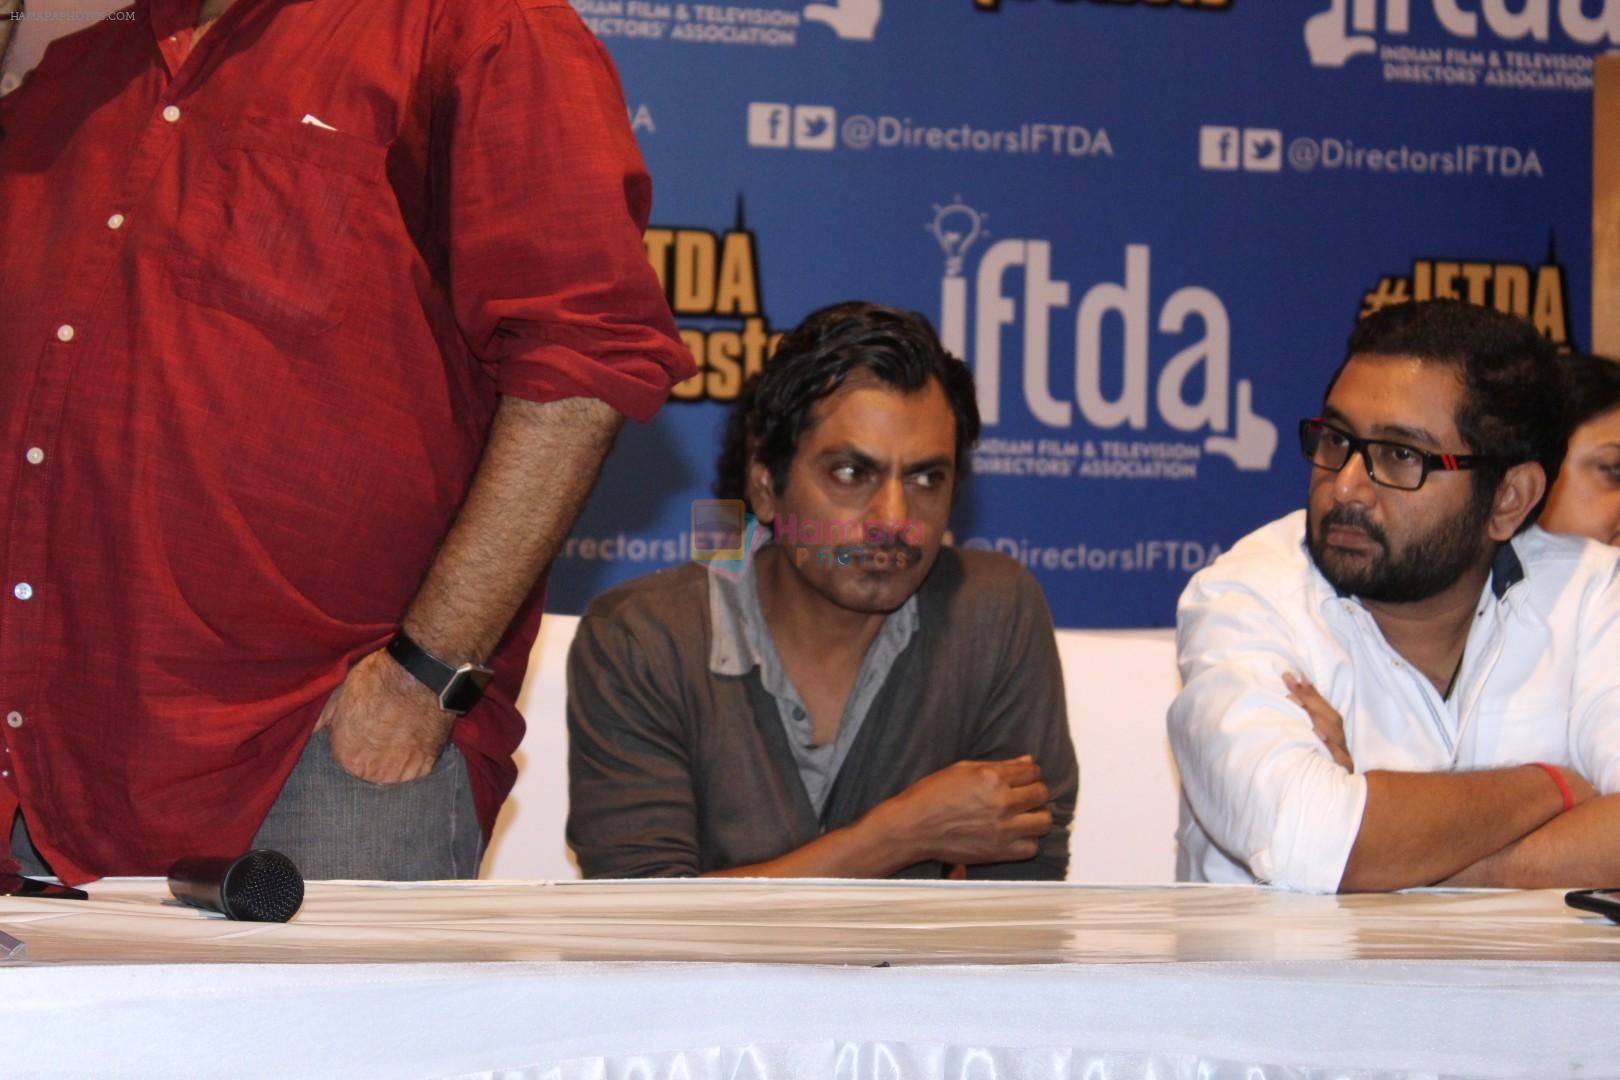 Nawazuddin Siddiqui At The Press Conference Along With Iftda (Indian Films & Tv Directors Association) on 2nd Aug 2017